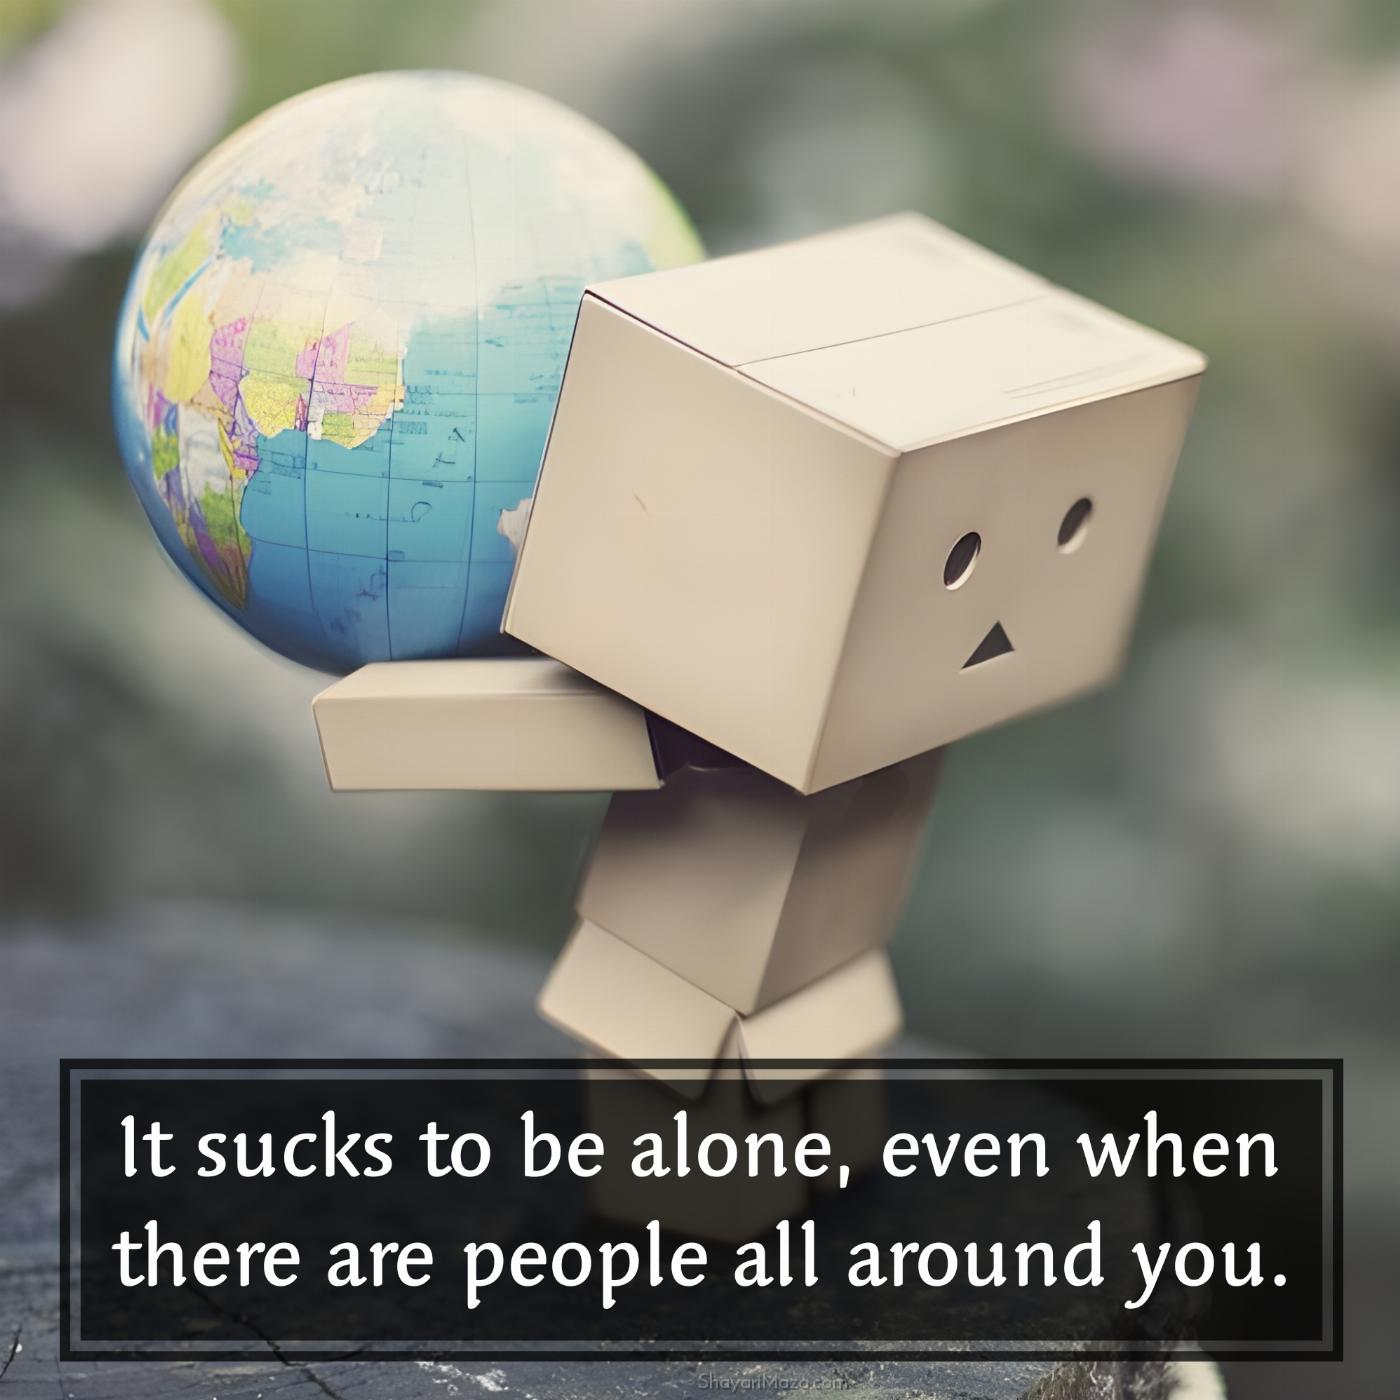 It sucks to be alone even when there are people all around